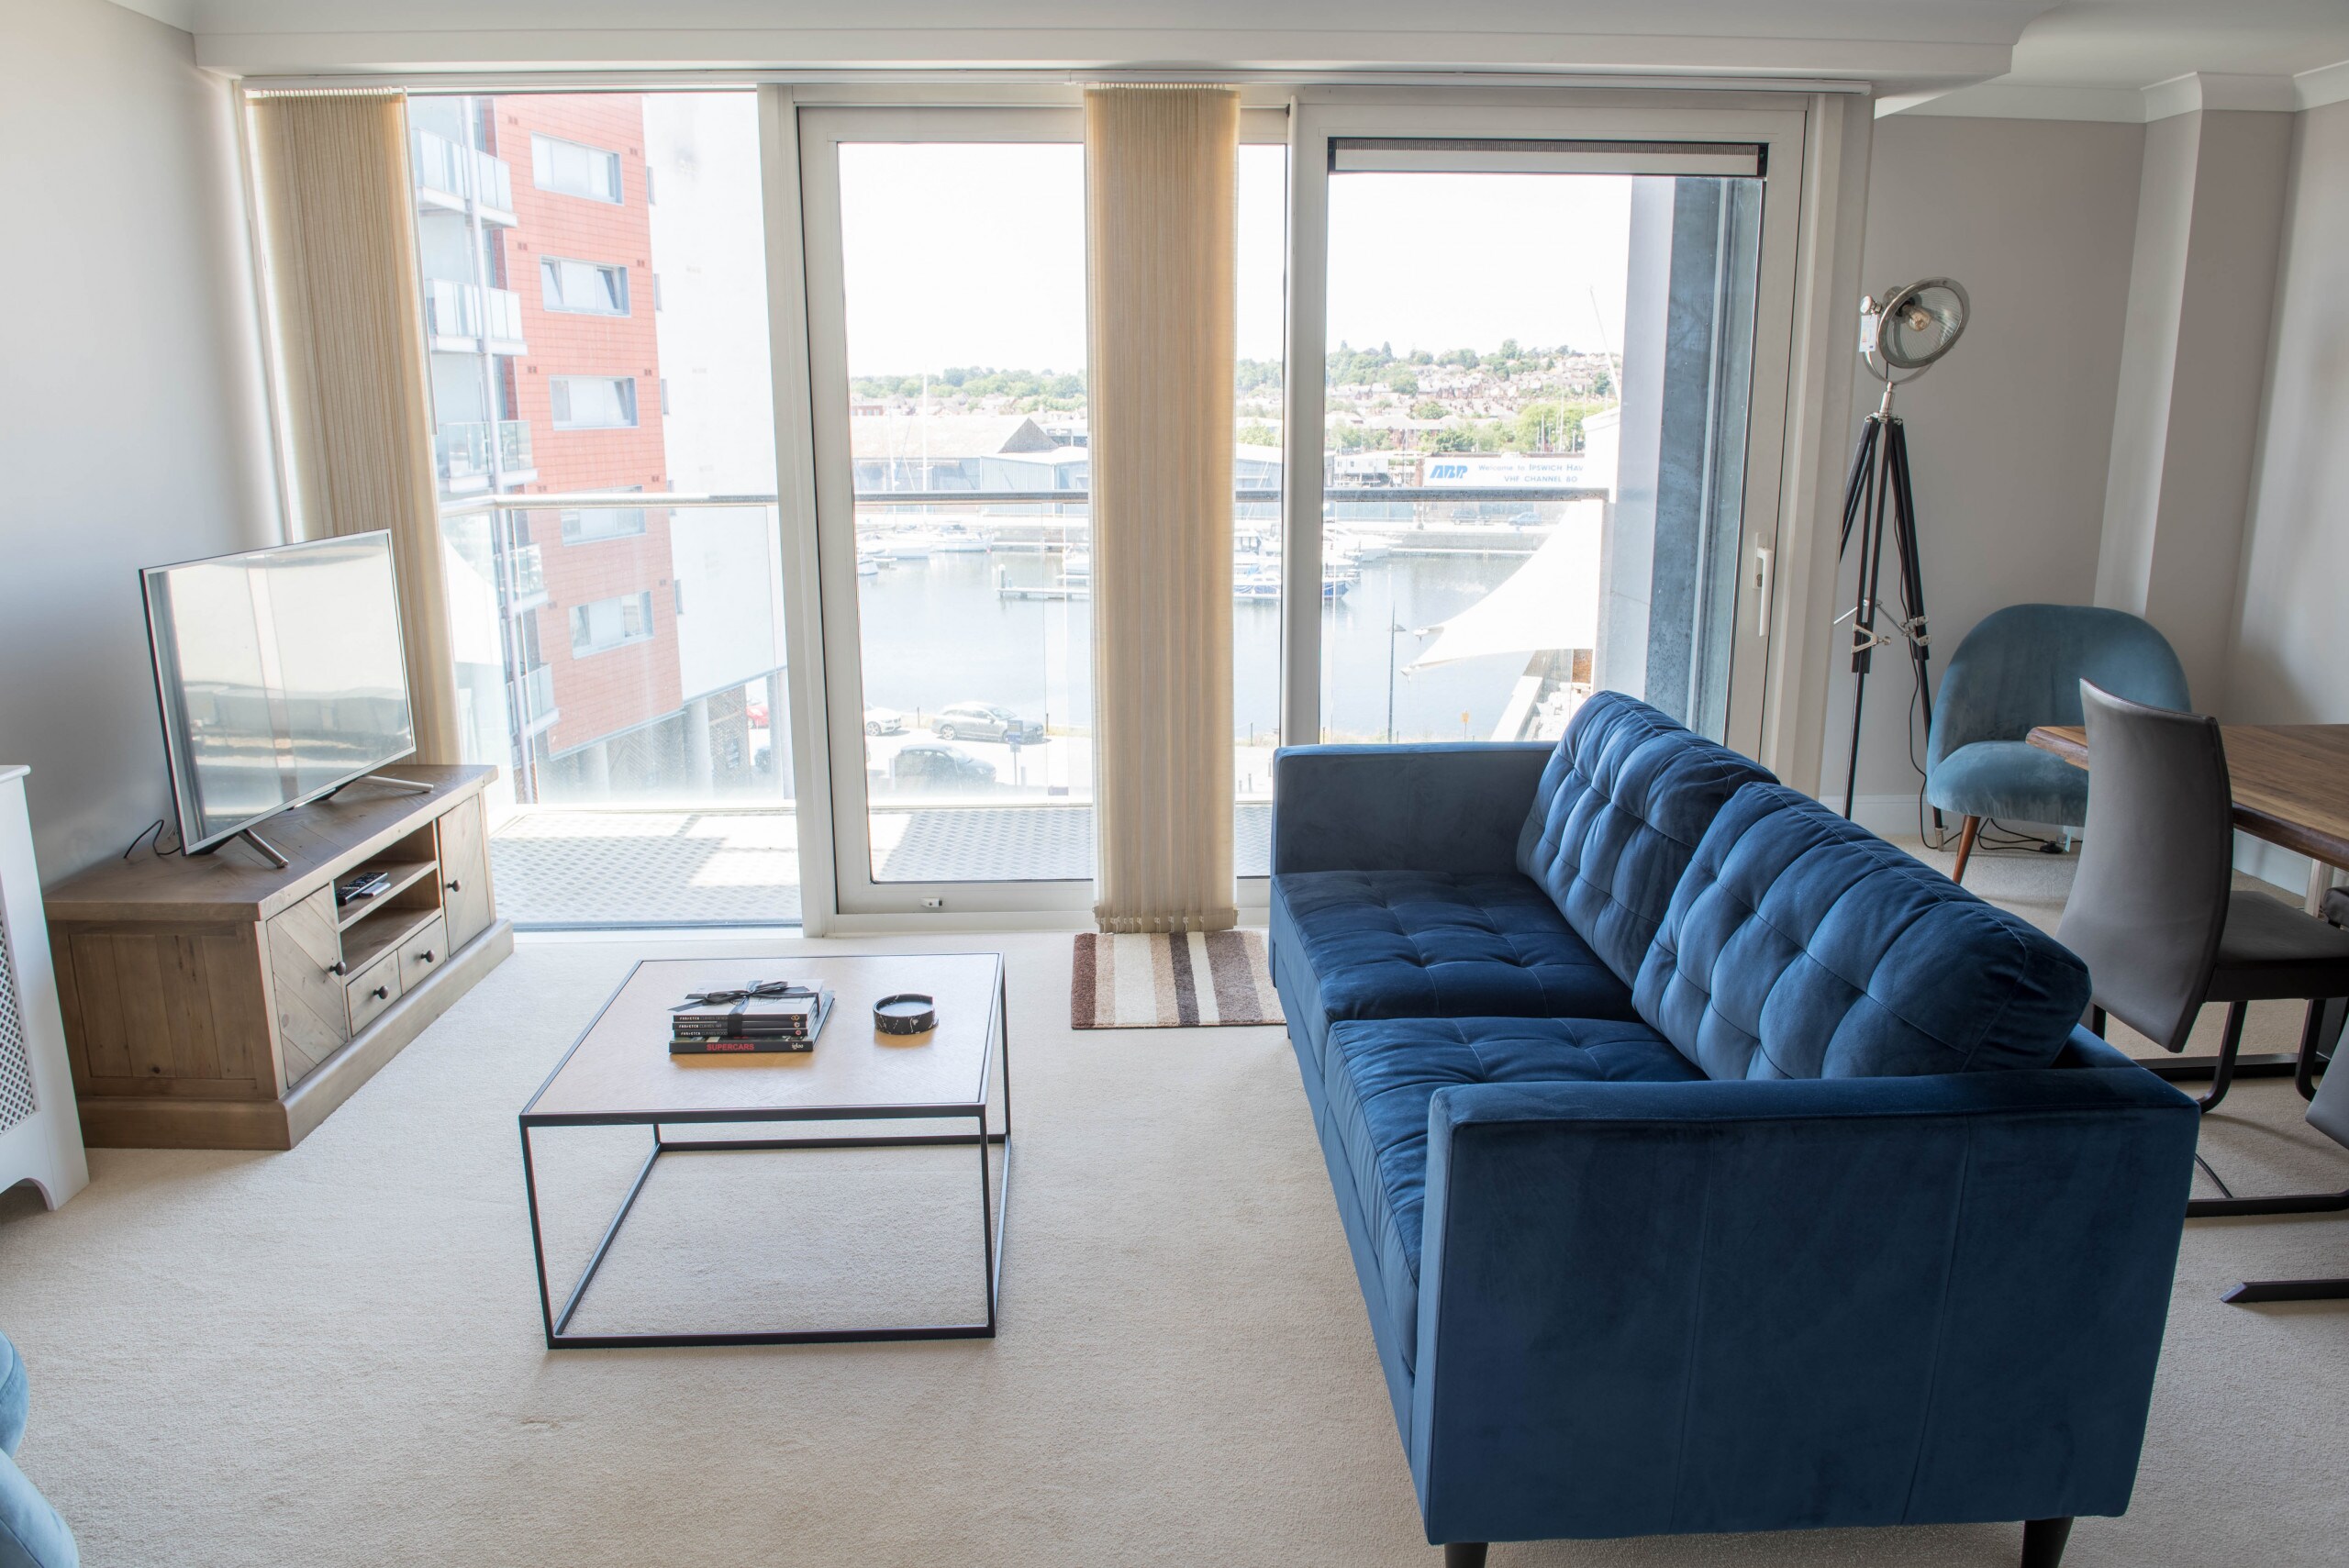 Property Image 1 - 2 Bedroom / 2 Bathroom, Ipswich Waterfront with balcony and marina views. Allocated parking space (indoor)